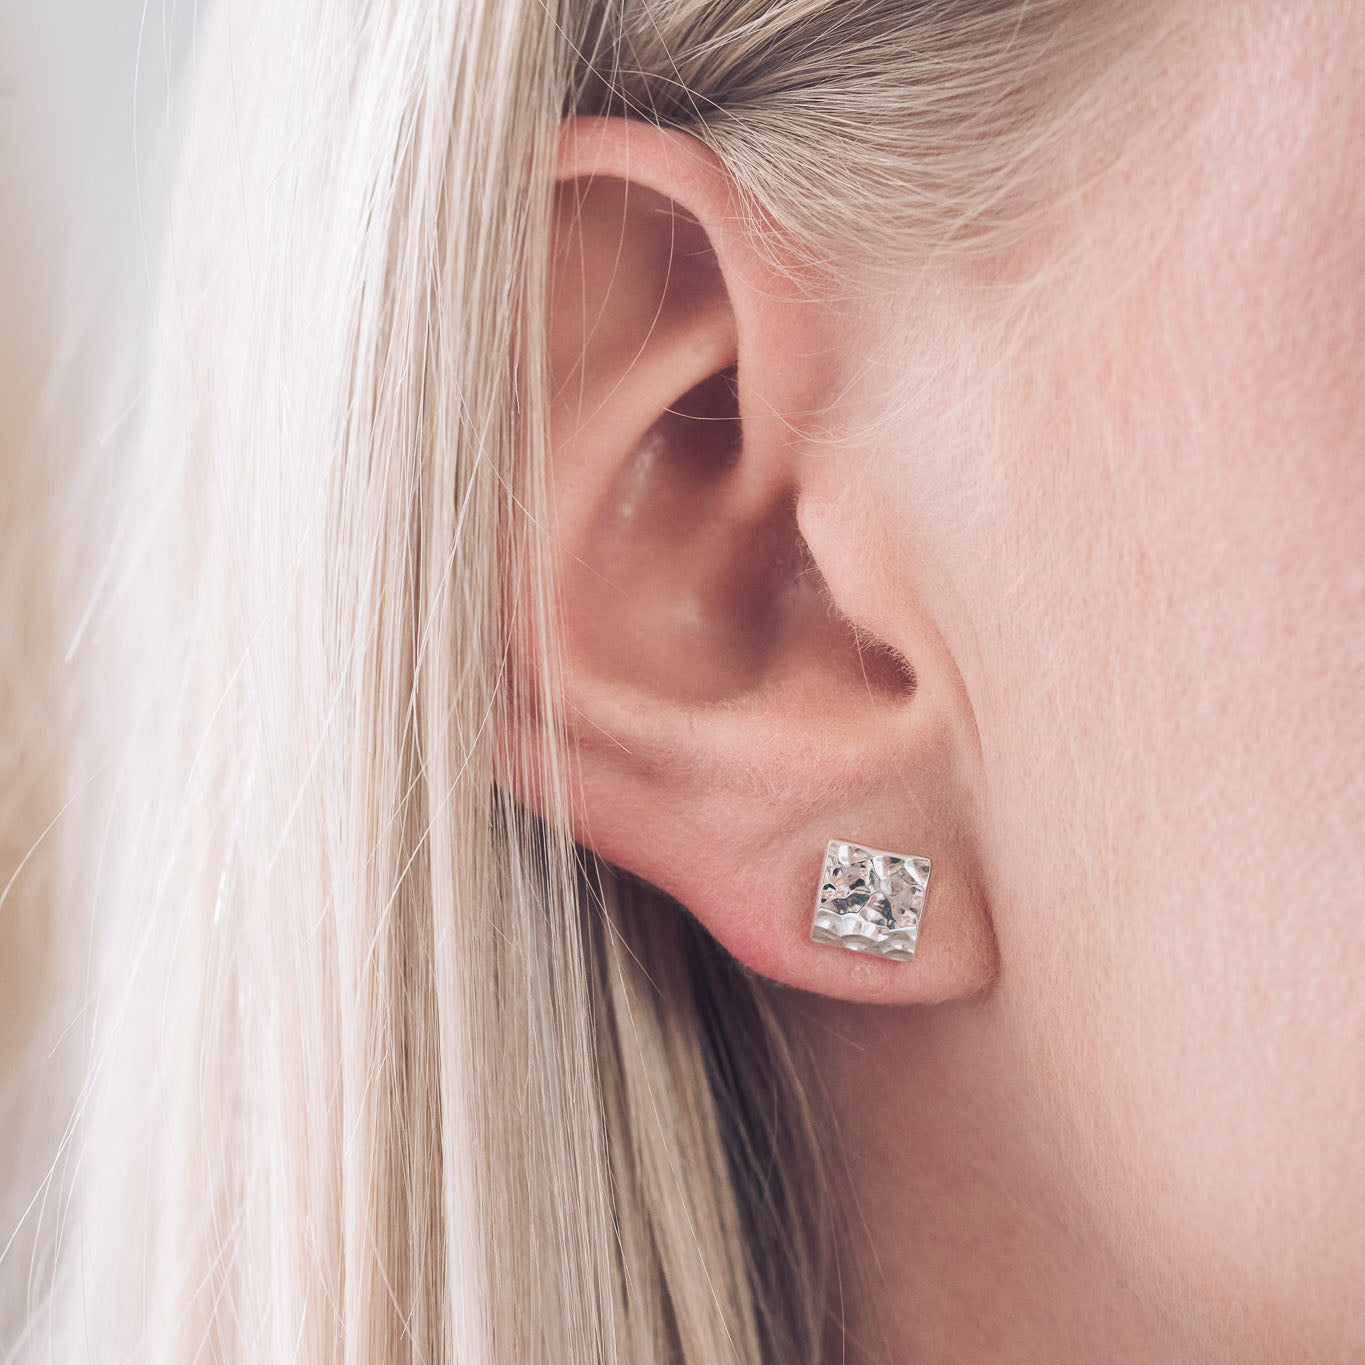 Handmade dimpled texture silver studs